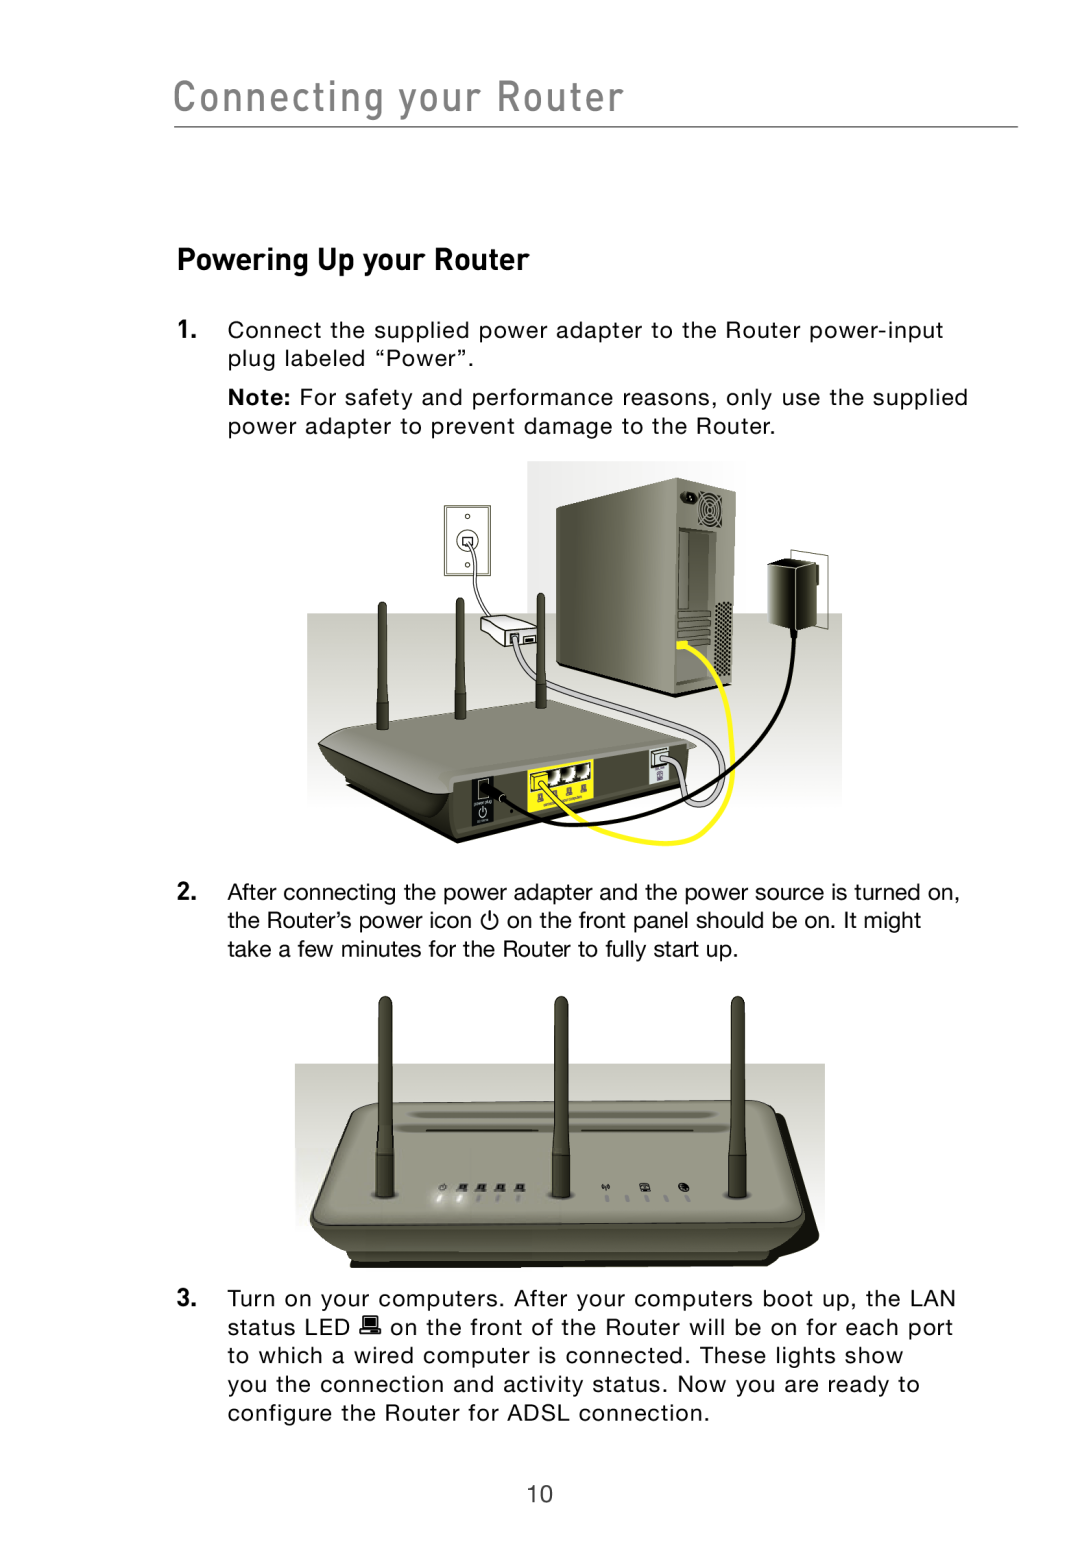 Belkin Pre-N manual Powering Up your Router, Connecting your Router 